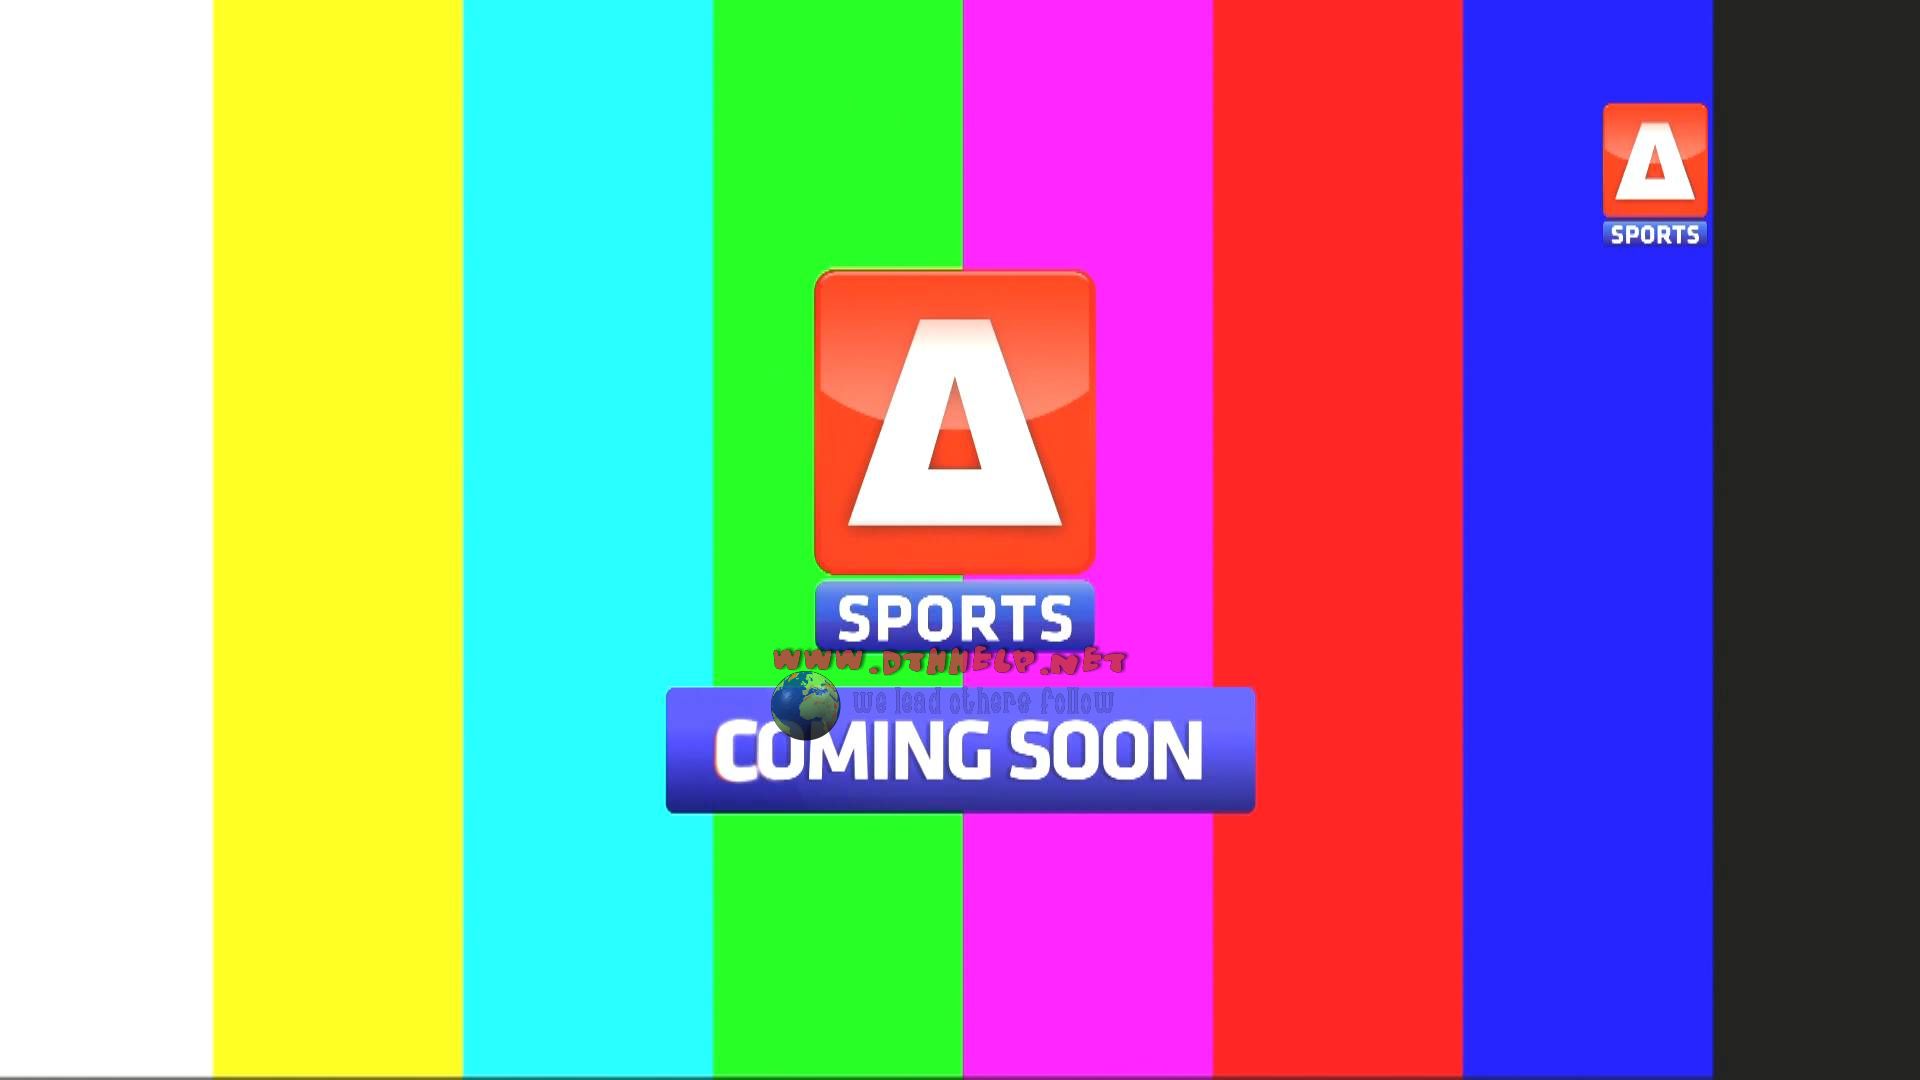 A Sports from Asiasat 7